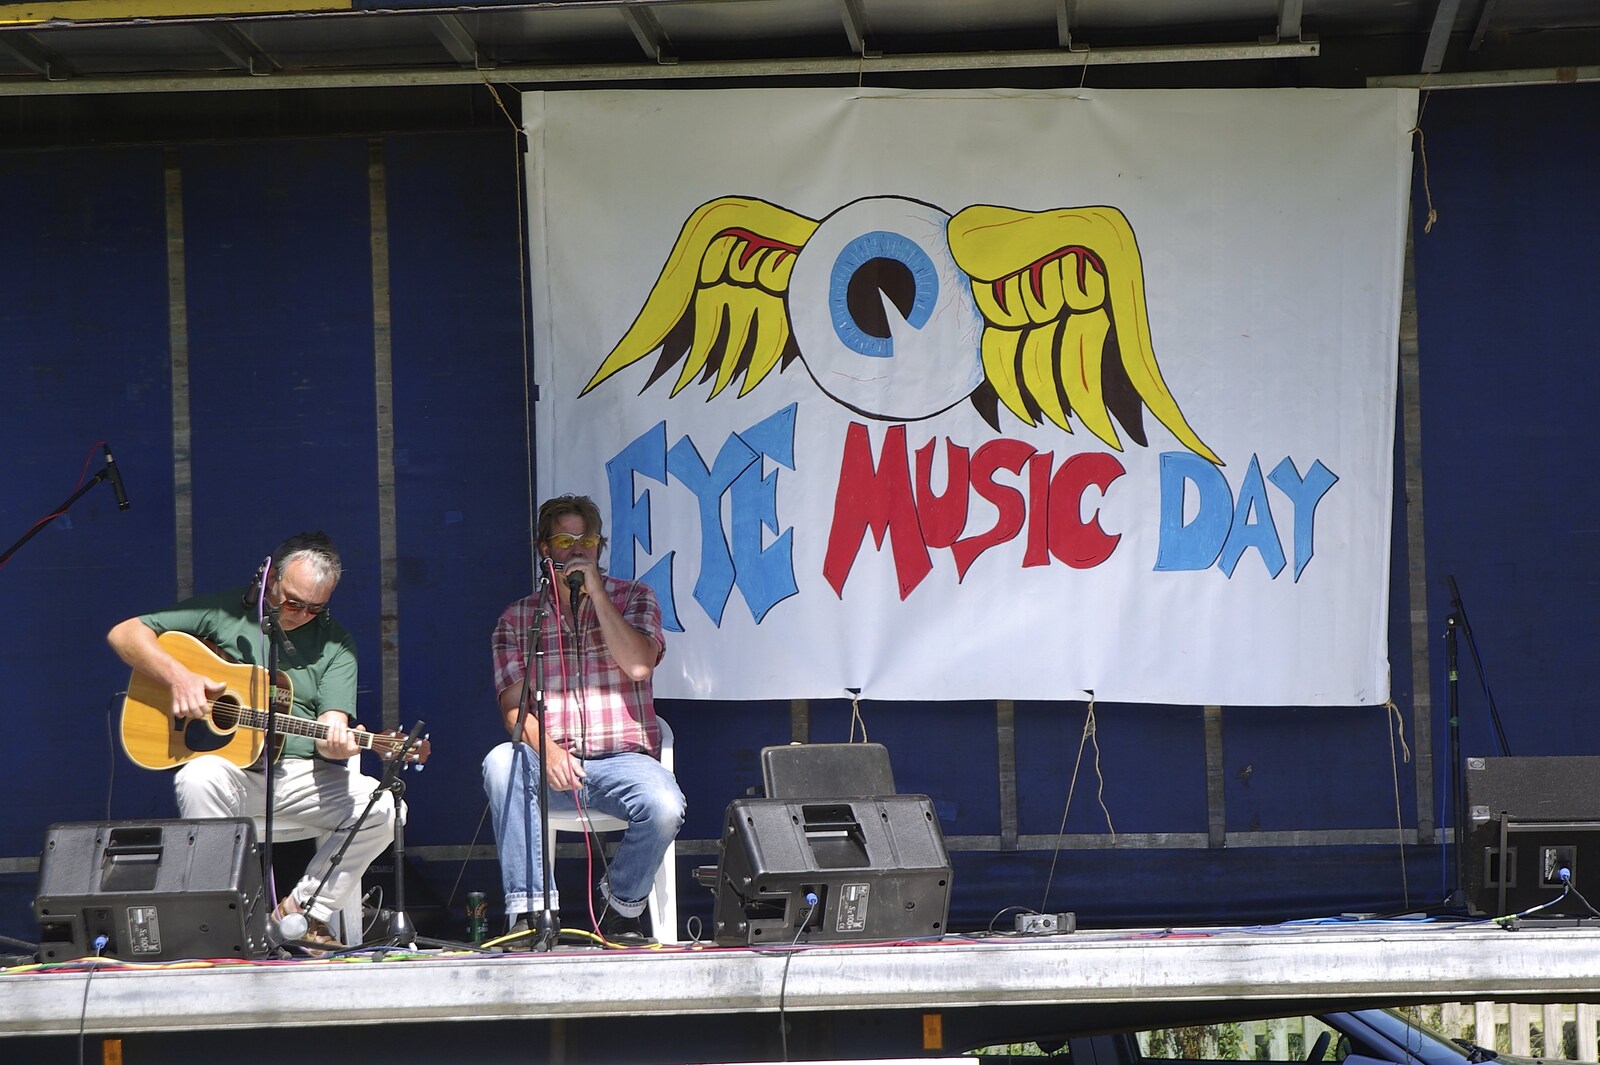 The Opening of Eye Skateboard Park, and The BBs at Cotton, Suffolk - 5th August 2007: Slightly bizzare 'Eye Music Day' logo